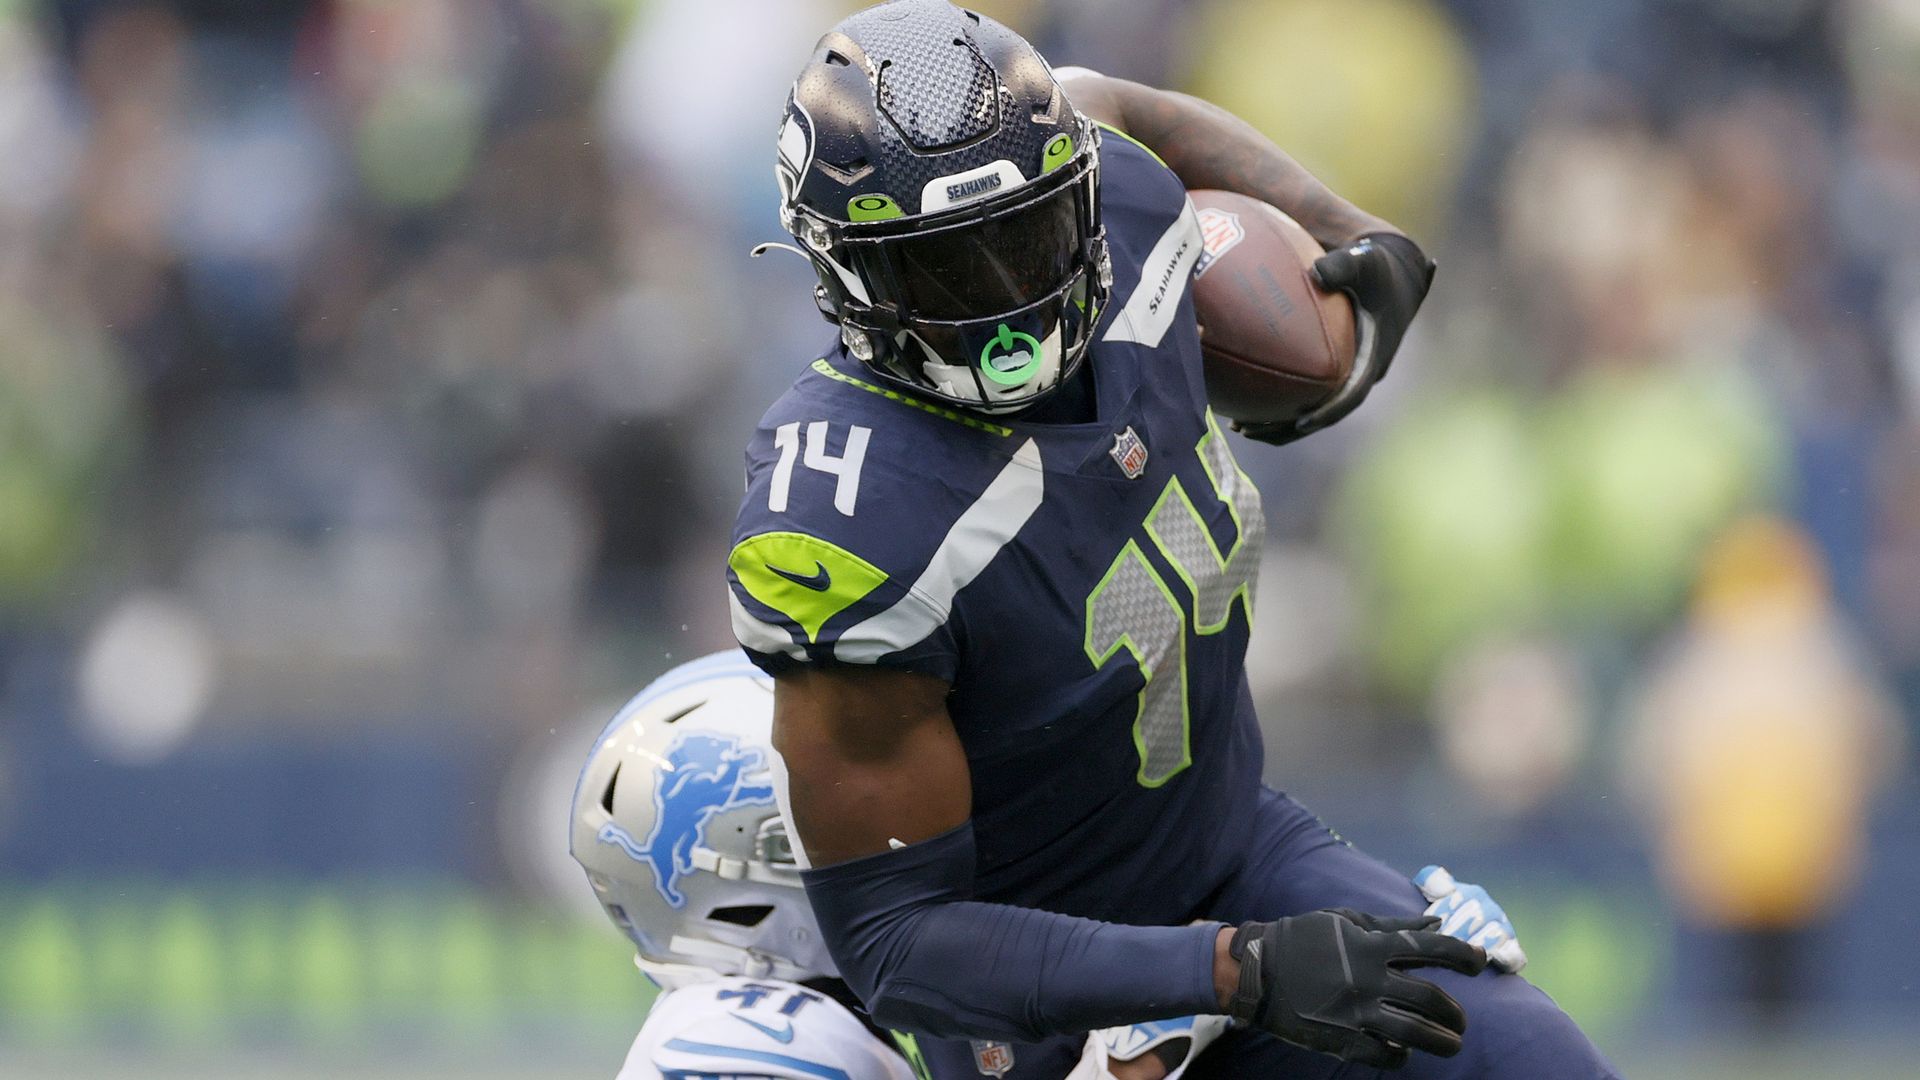 DK Metcalf #14 of the Seattle Seahawks carries the ball against the Detroit Lions during the first half at Lumen Field on January 02, 2022 in Seattle, Washington..